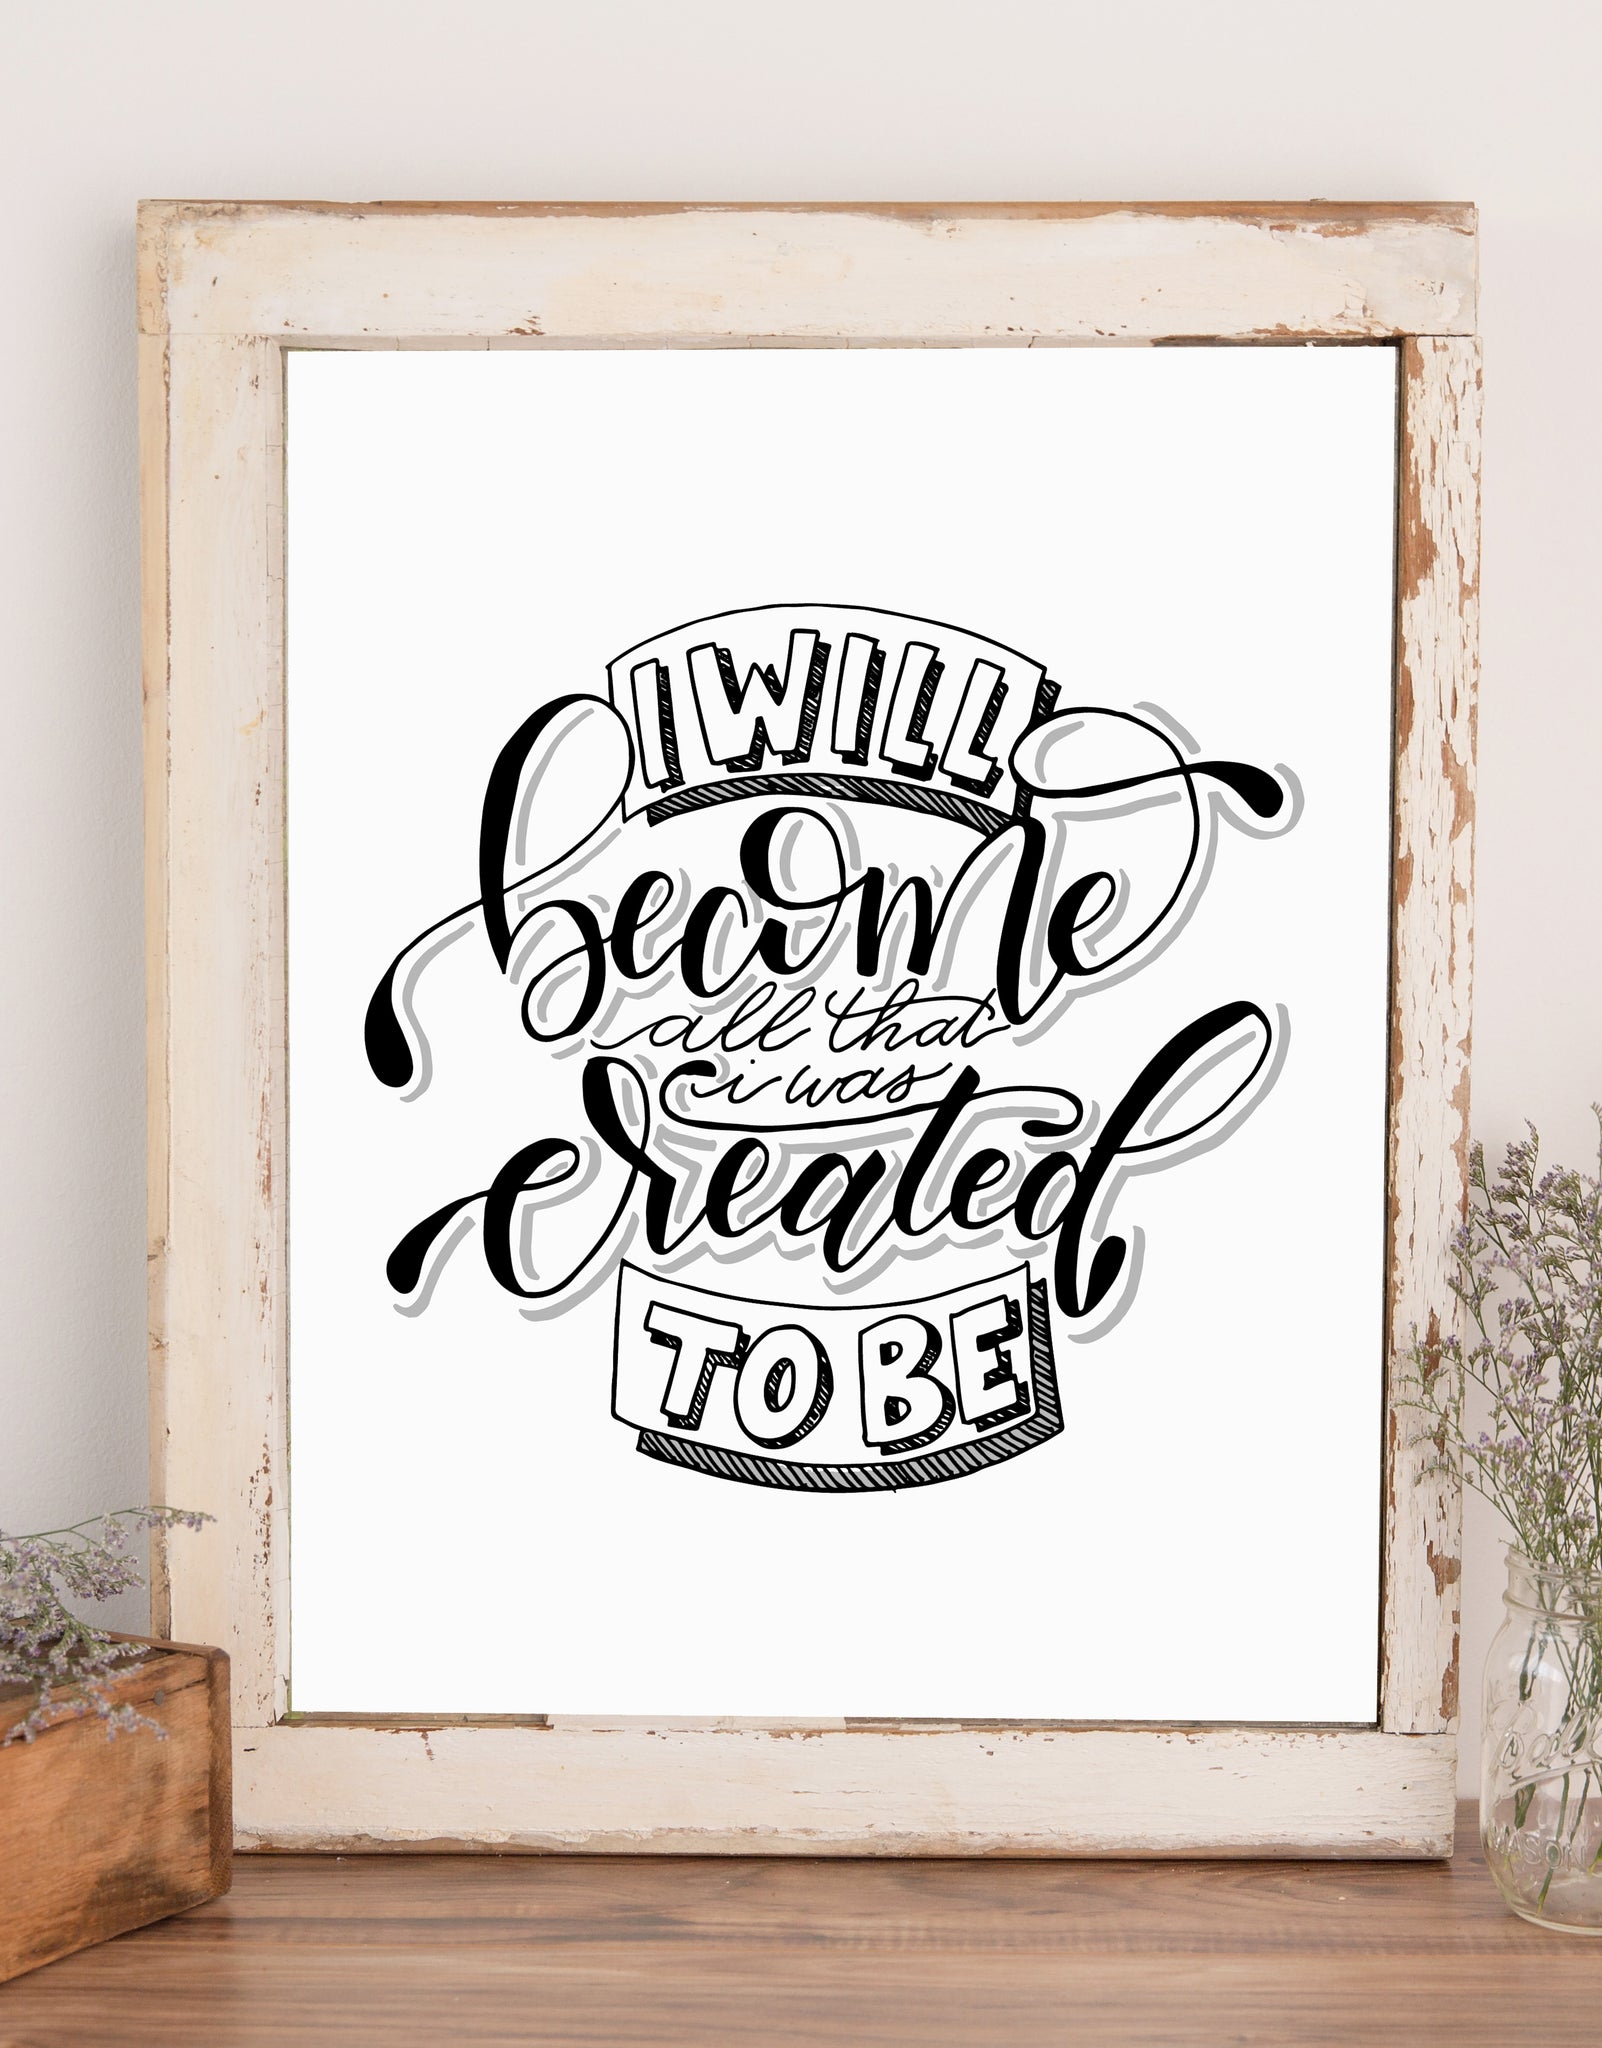 Wall art that says i will become all that I was created to be in black and white modern calligraphy and typography